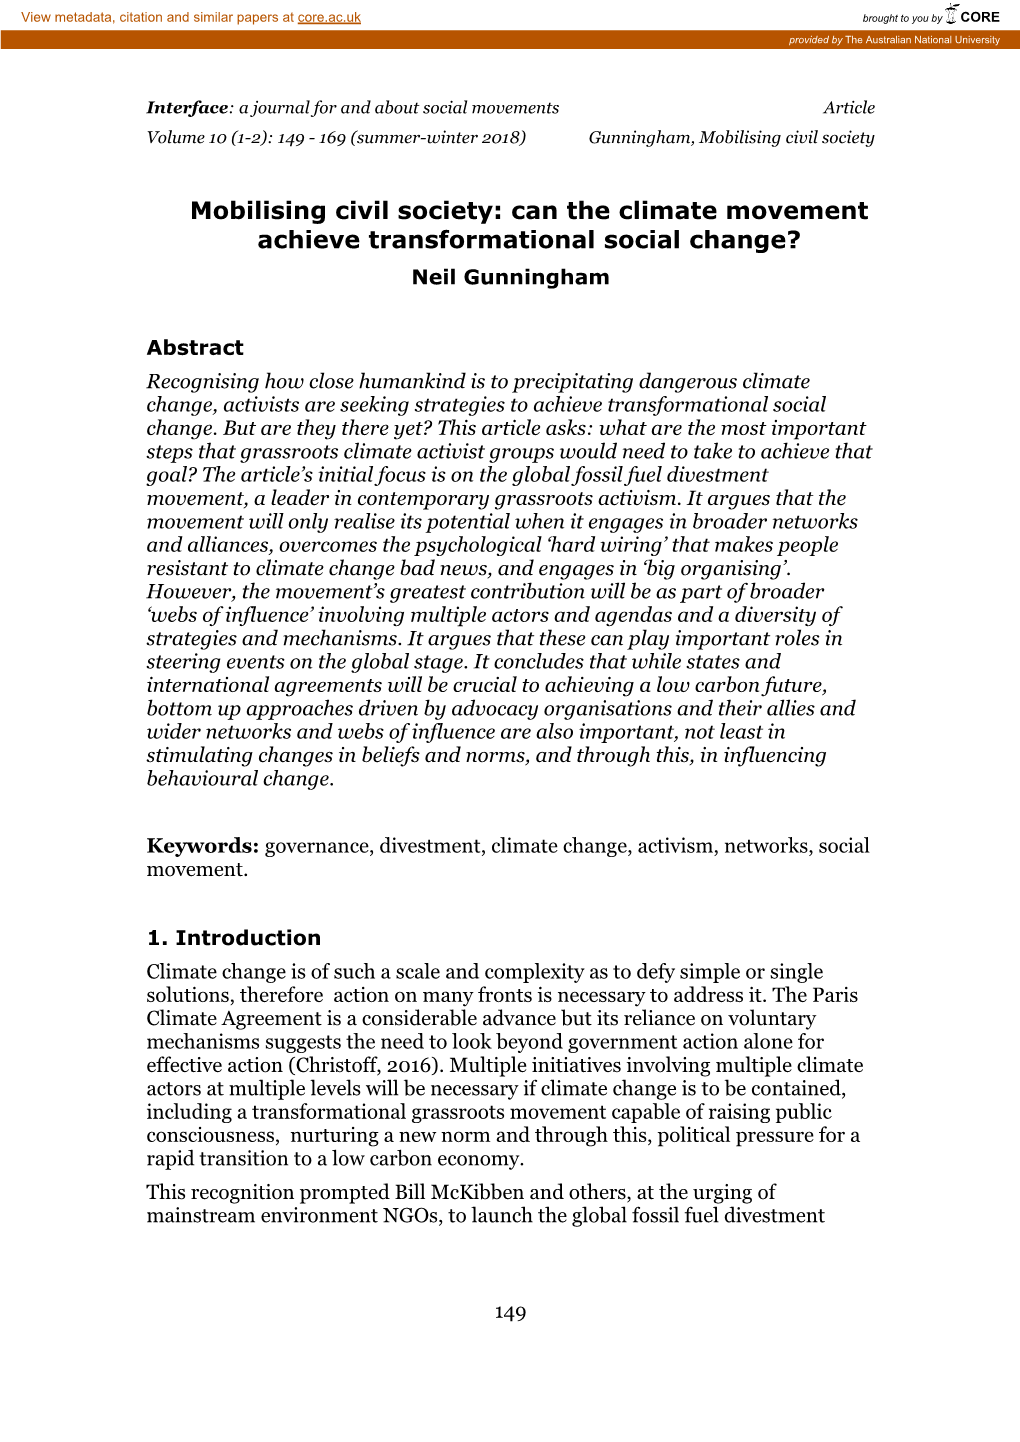 Mobilising Civil Society: Can the Climate Movement Achieve Transformational Social Change? Neil Gunningham